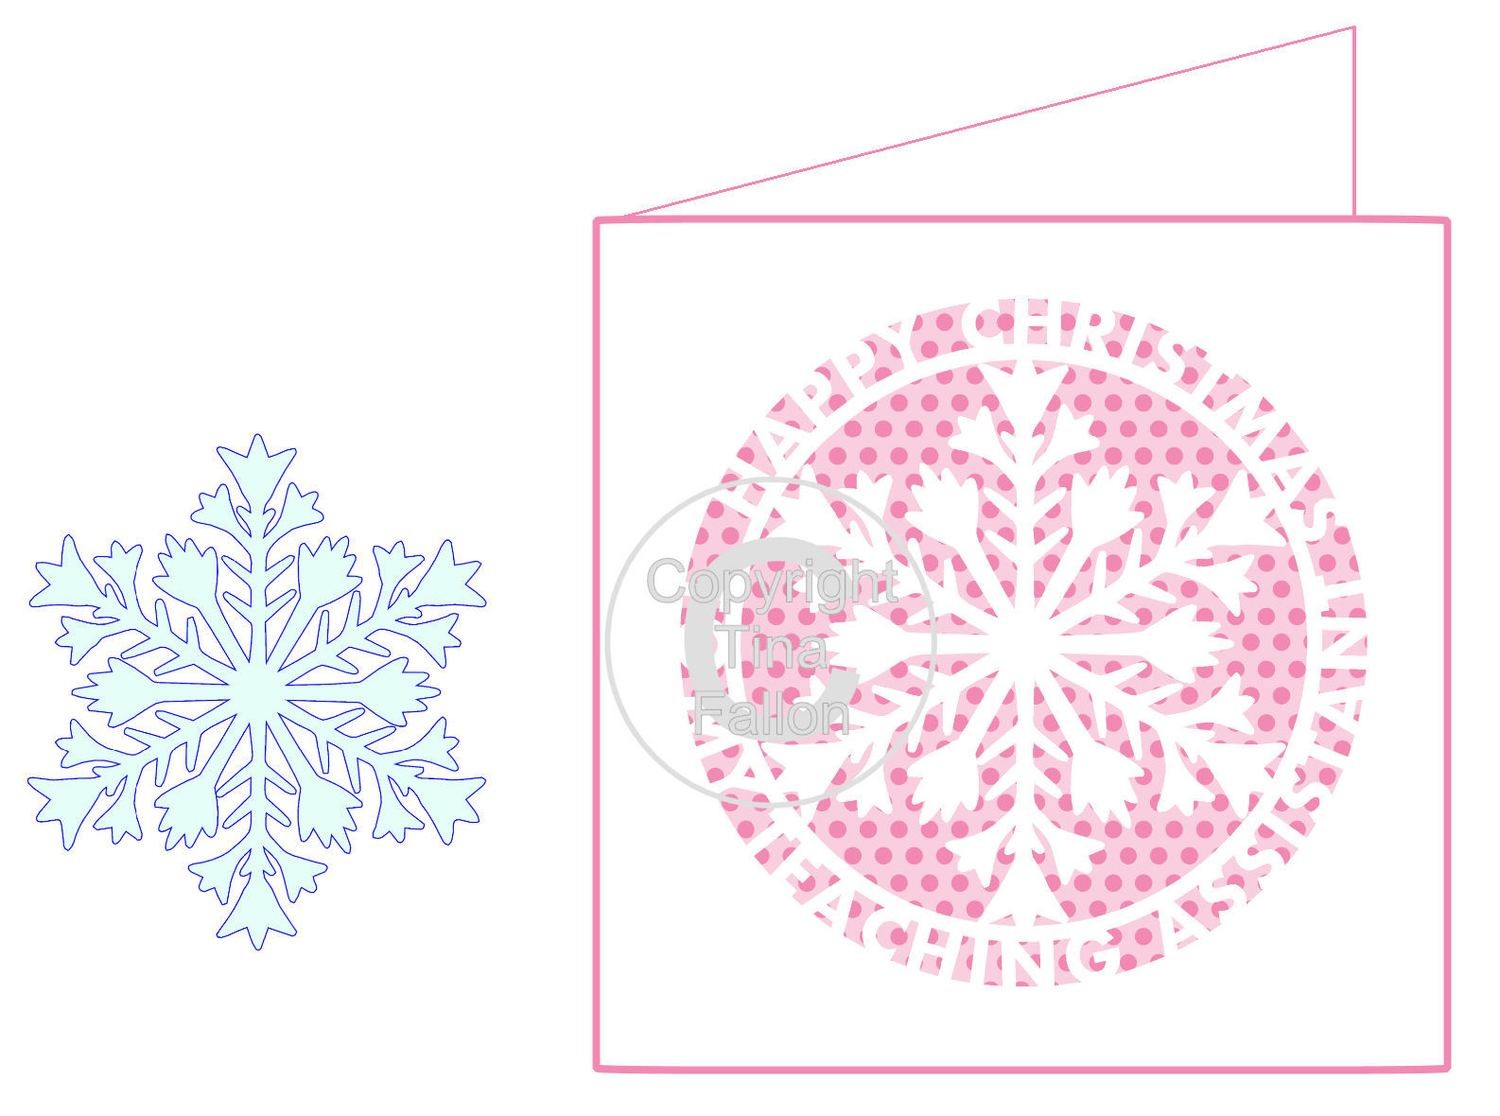 Happy Christmas Teaching Teacher Assistant - CARD TEMPLATE WITH ADDITIONAL SNOWFLAKE FOR 3D